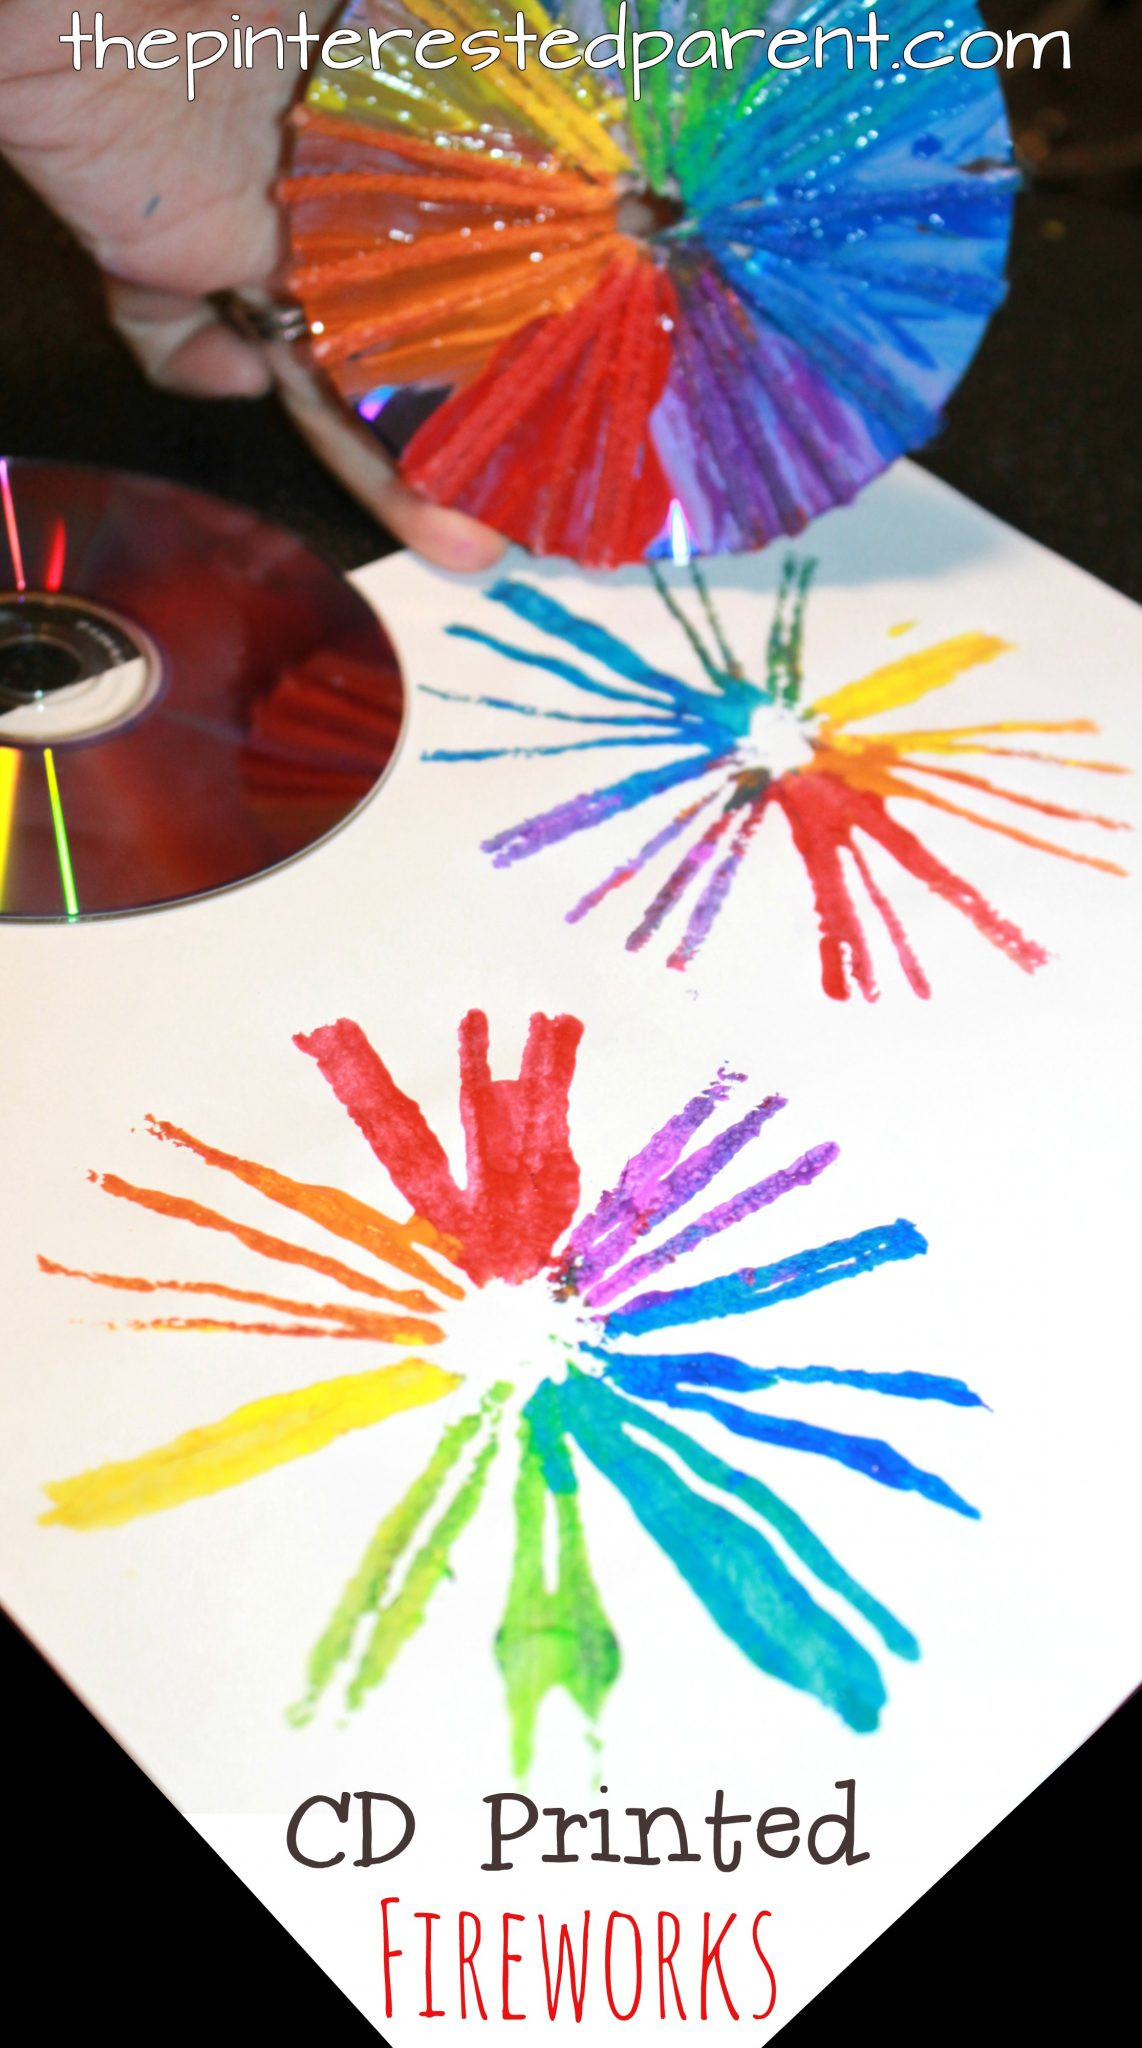 Art And Craft Ideas For Preschoolers
 Printmaking With Cds For Kids – The Pinterested Parent